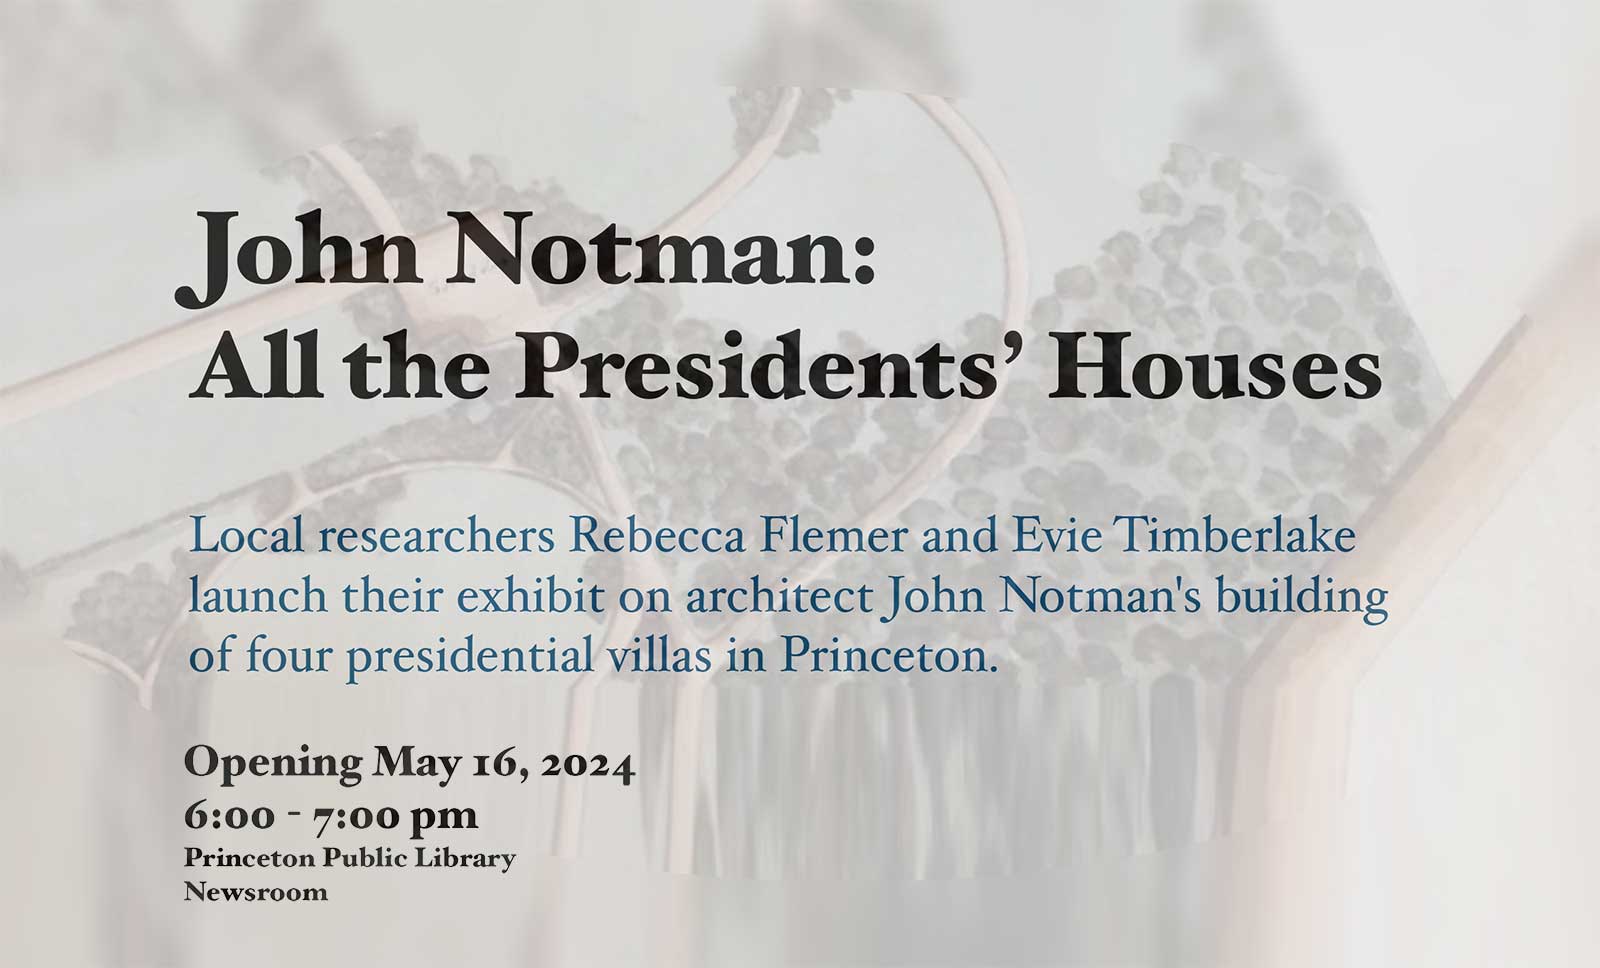 John Notman: All the Presidents' Houses event graphic